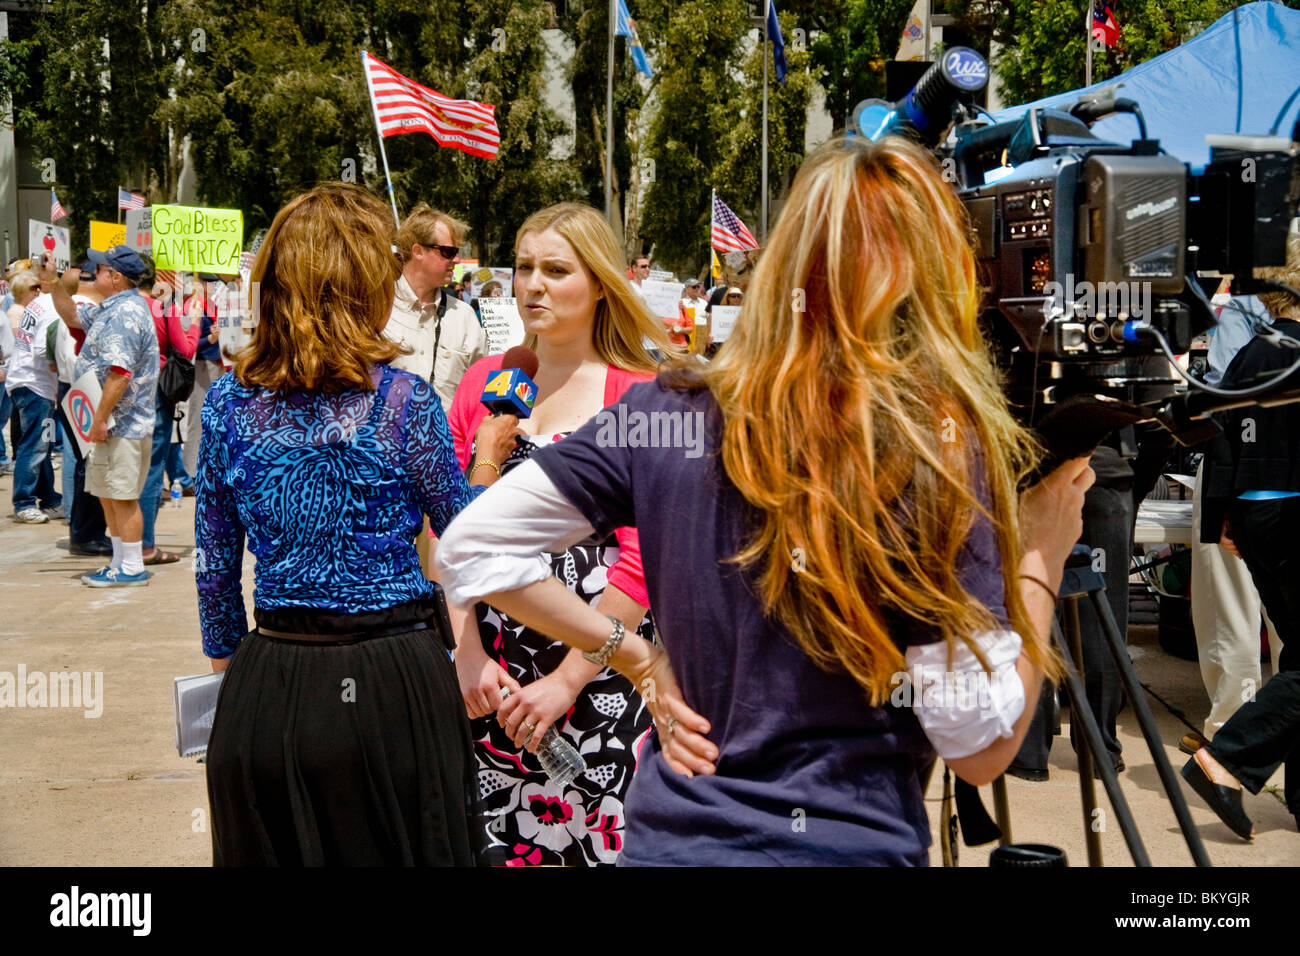 A television news reporter interviews a protester at a 'Tea Party' rally on April 15 (Tax Day) in Santa Ana, California. Stock Photo